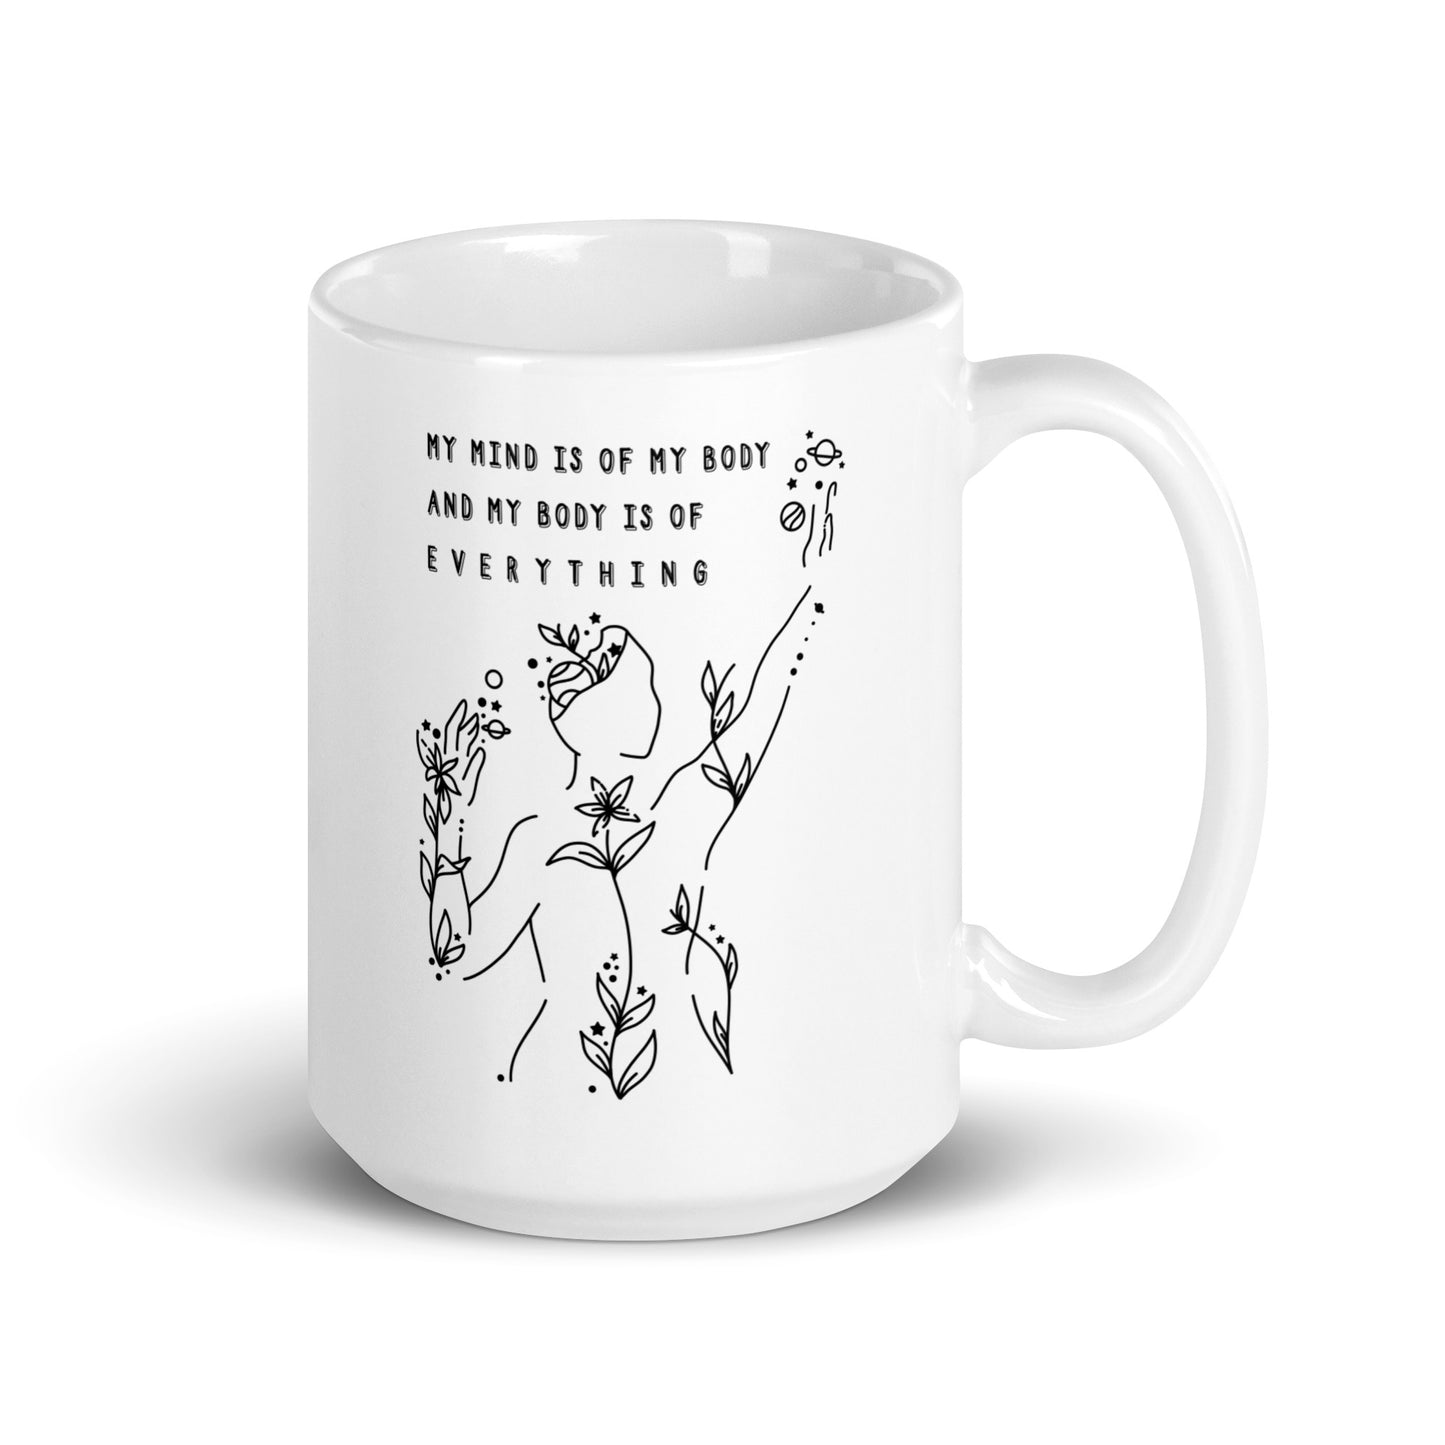 A  white 15 ounce coffee mug featuring an abstract illustration of a figure whose body is spreading out into plants and planets and stars. Text above the figure reads "My mind is of my body and my body is of everything."